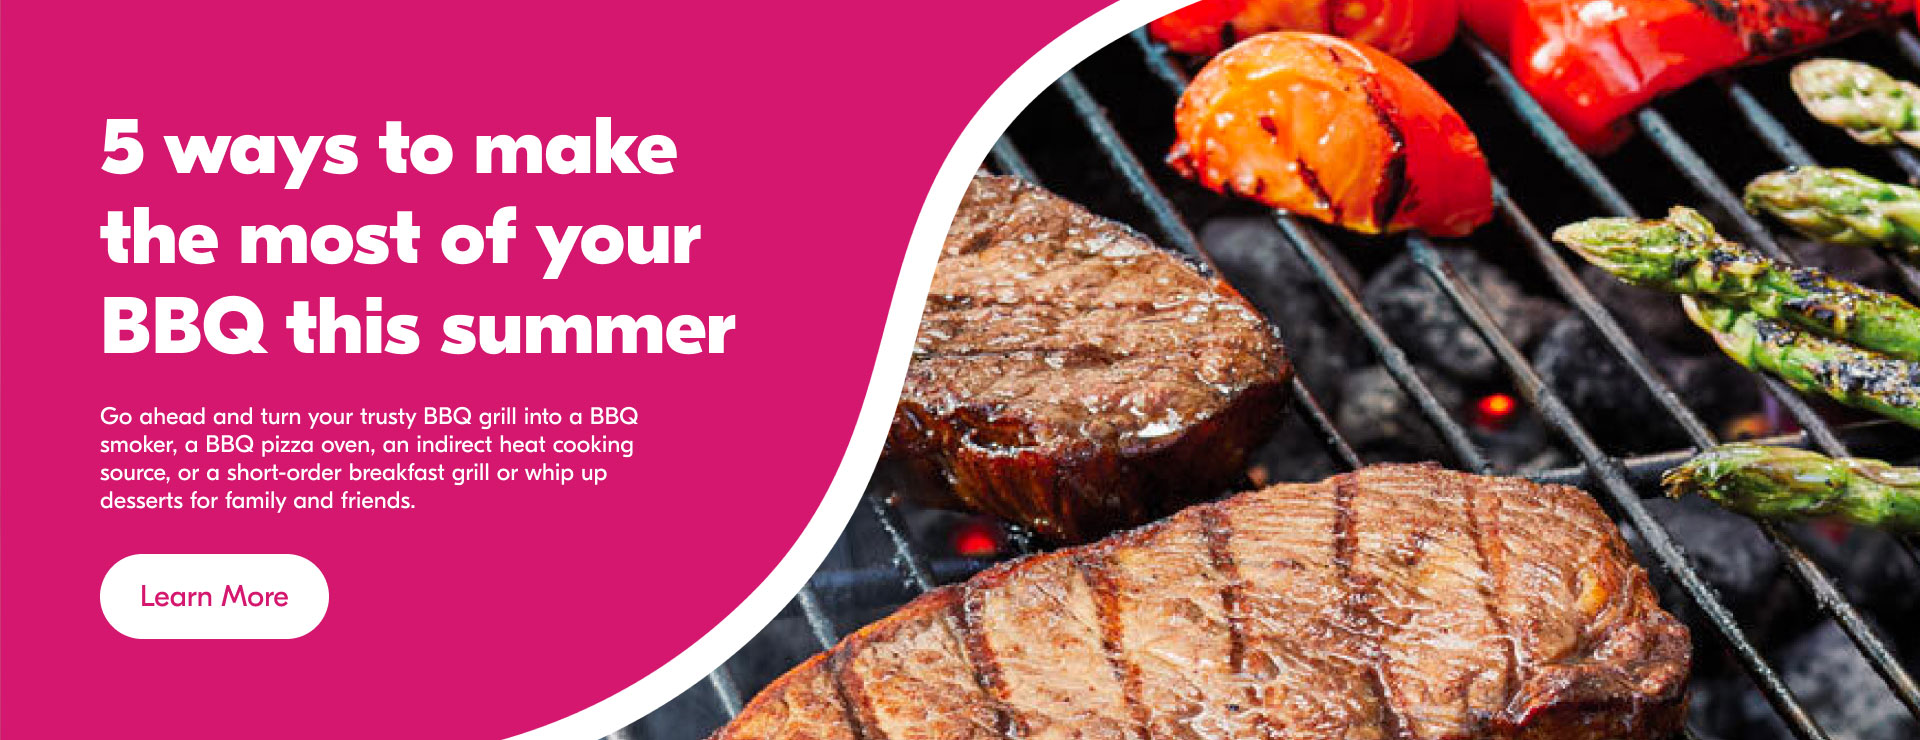 Text Reading 'Know 5 ways to make the most of you BBQ this summer. Go ahead and turnyour trusty BBQ grill into a BBQ smoker, a BBQ oven, an indirect heat cooking source or a short-order breakfast grill or whip up desserts for family and friends. 'Learn more' from the button below for more information.'